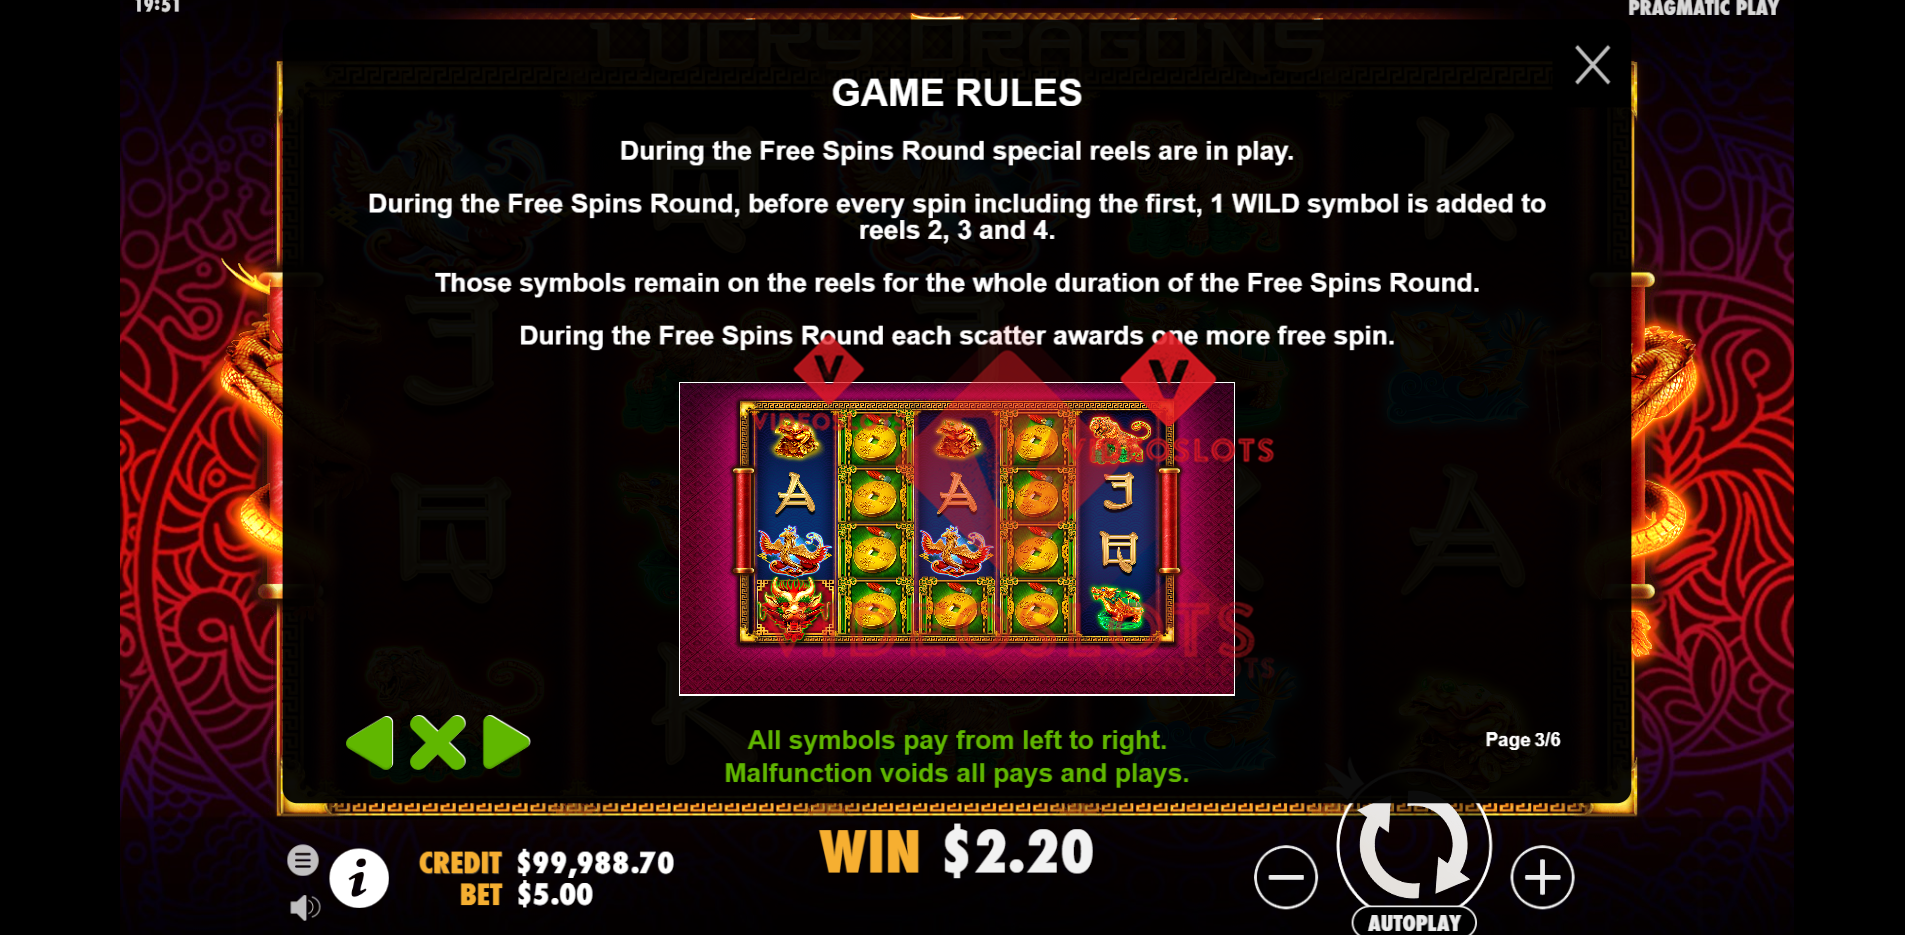 Game Rules for Lucky Dragons slot by Pragmatic Play